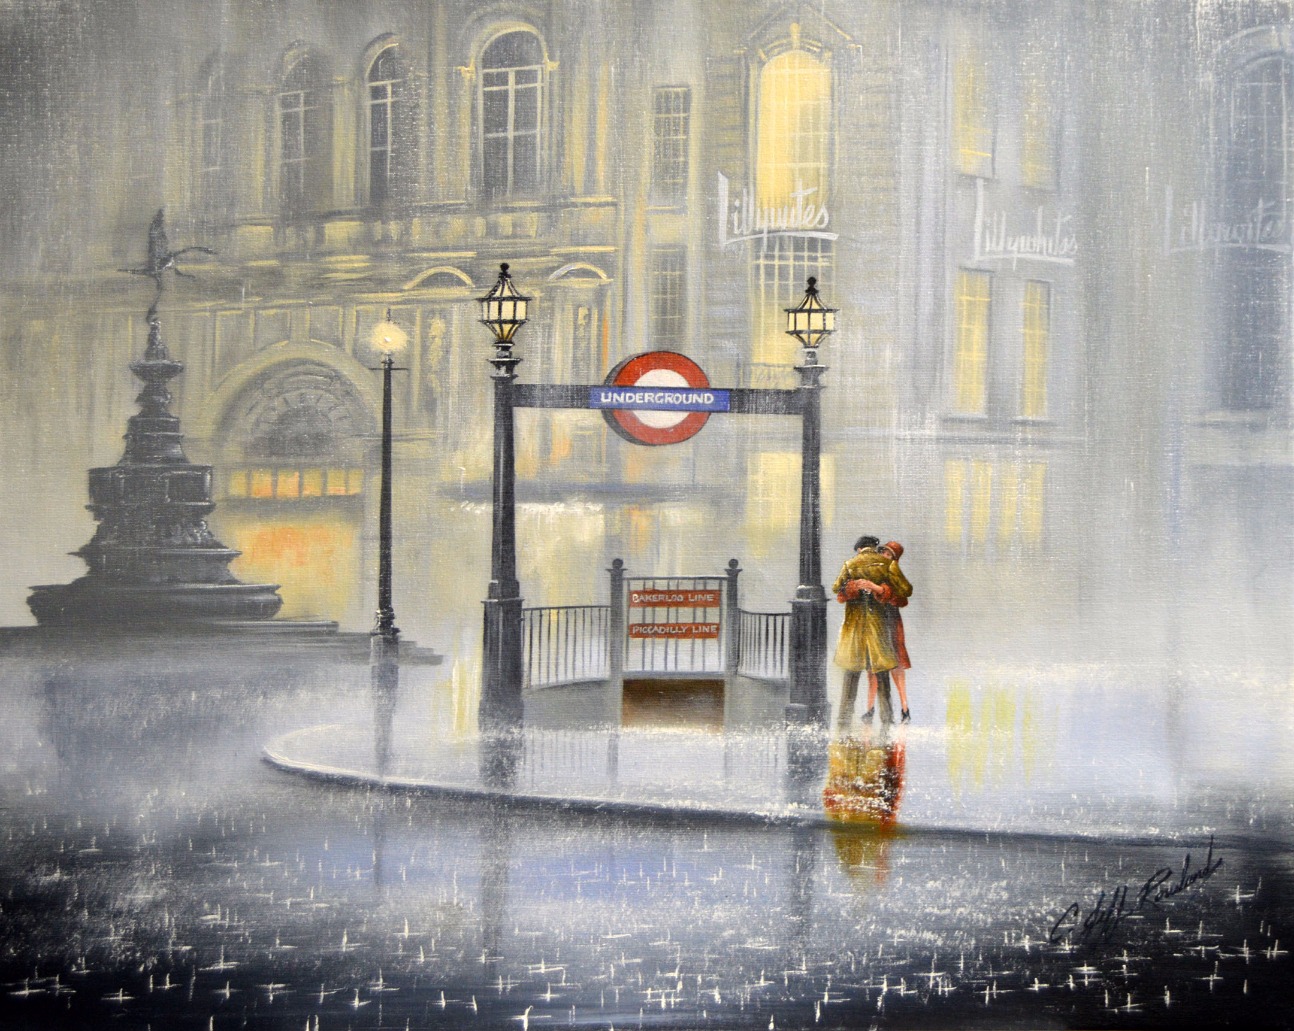 The Last Hug at Piccadilly by Jeff Rowland, Love | Romance | Water | London | Transport | Train